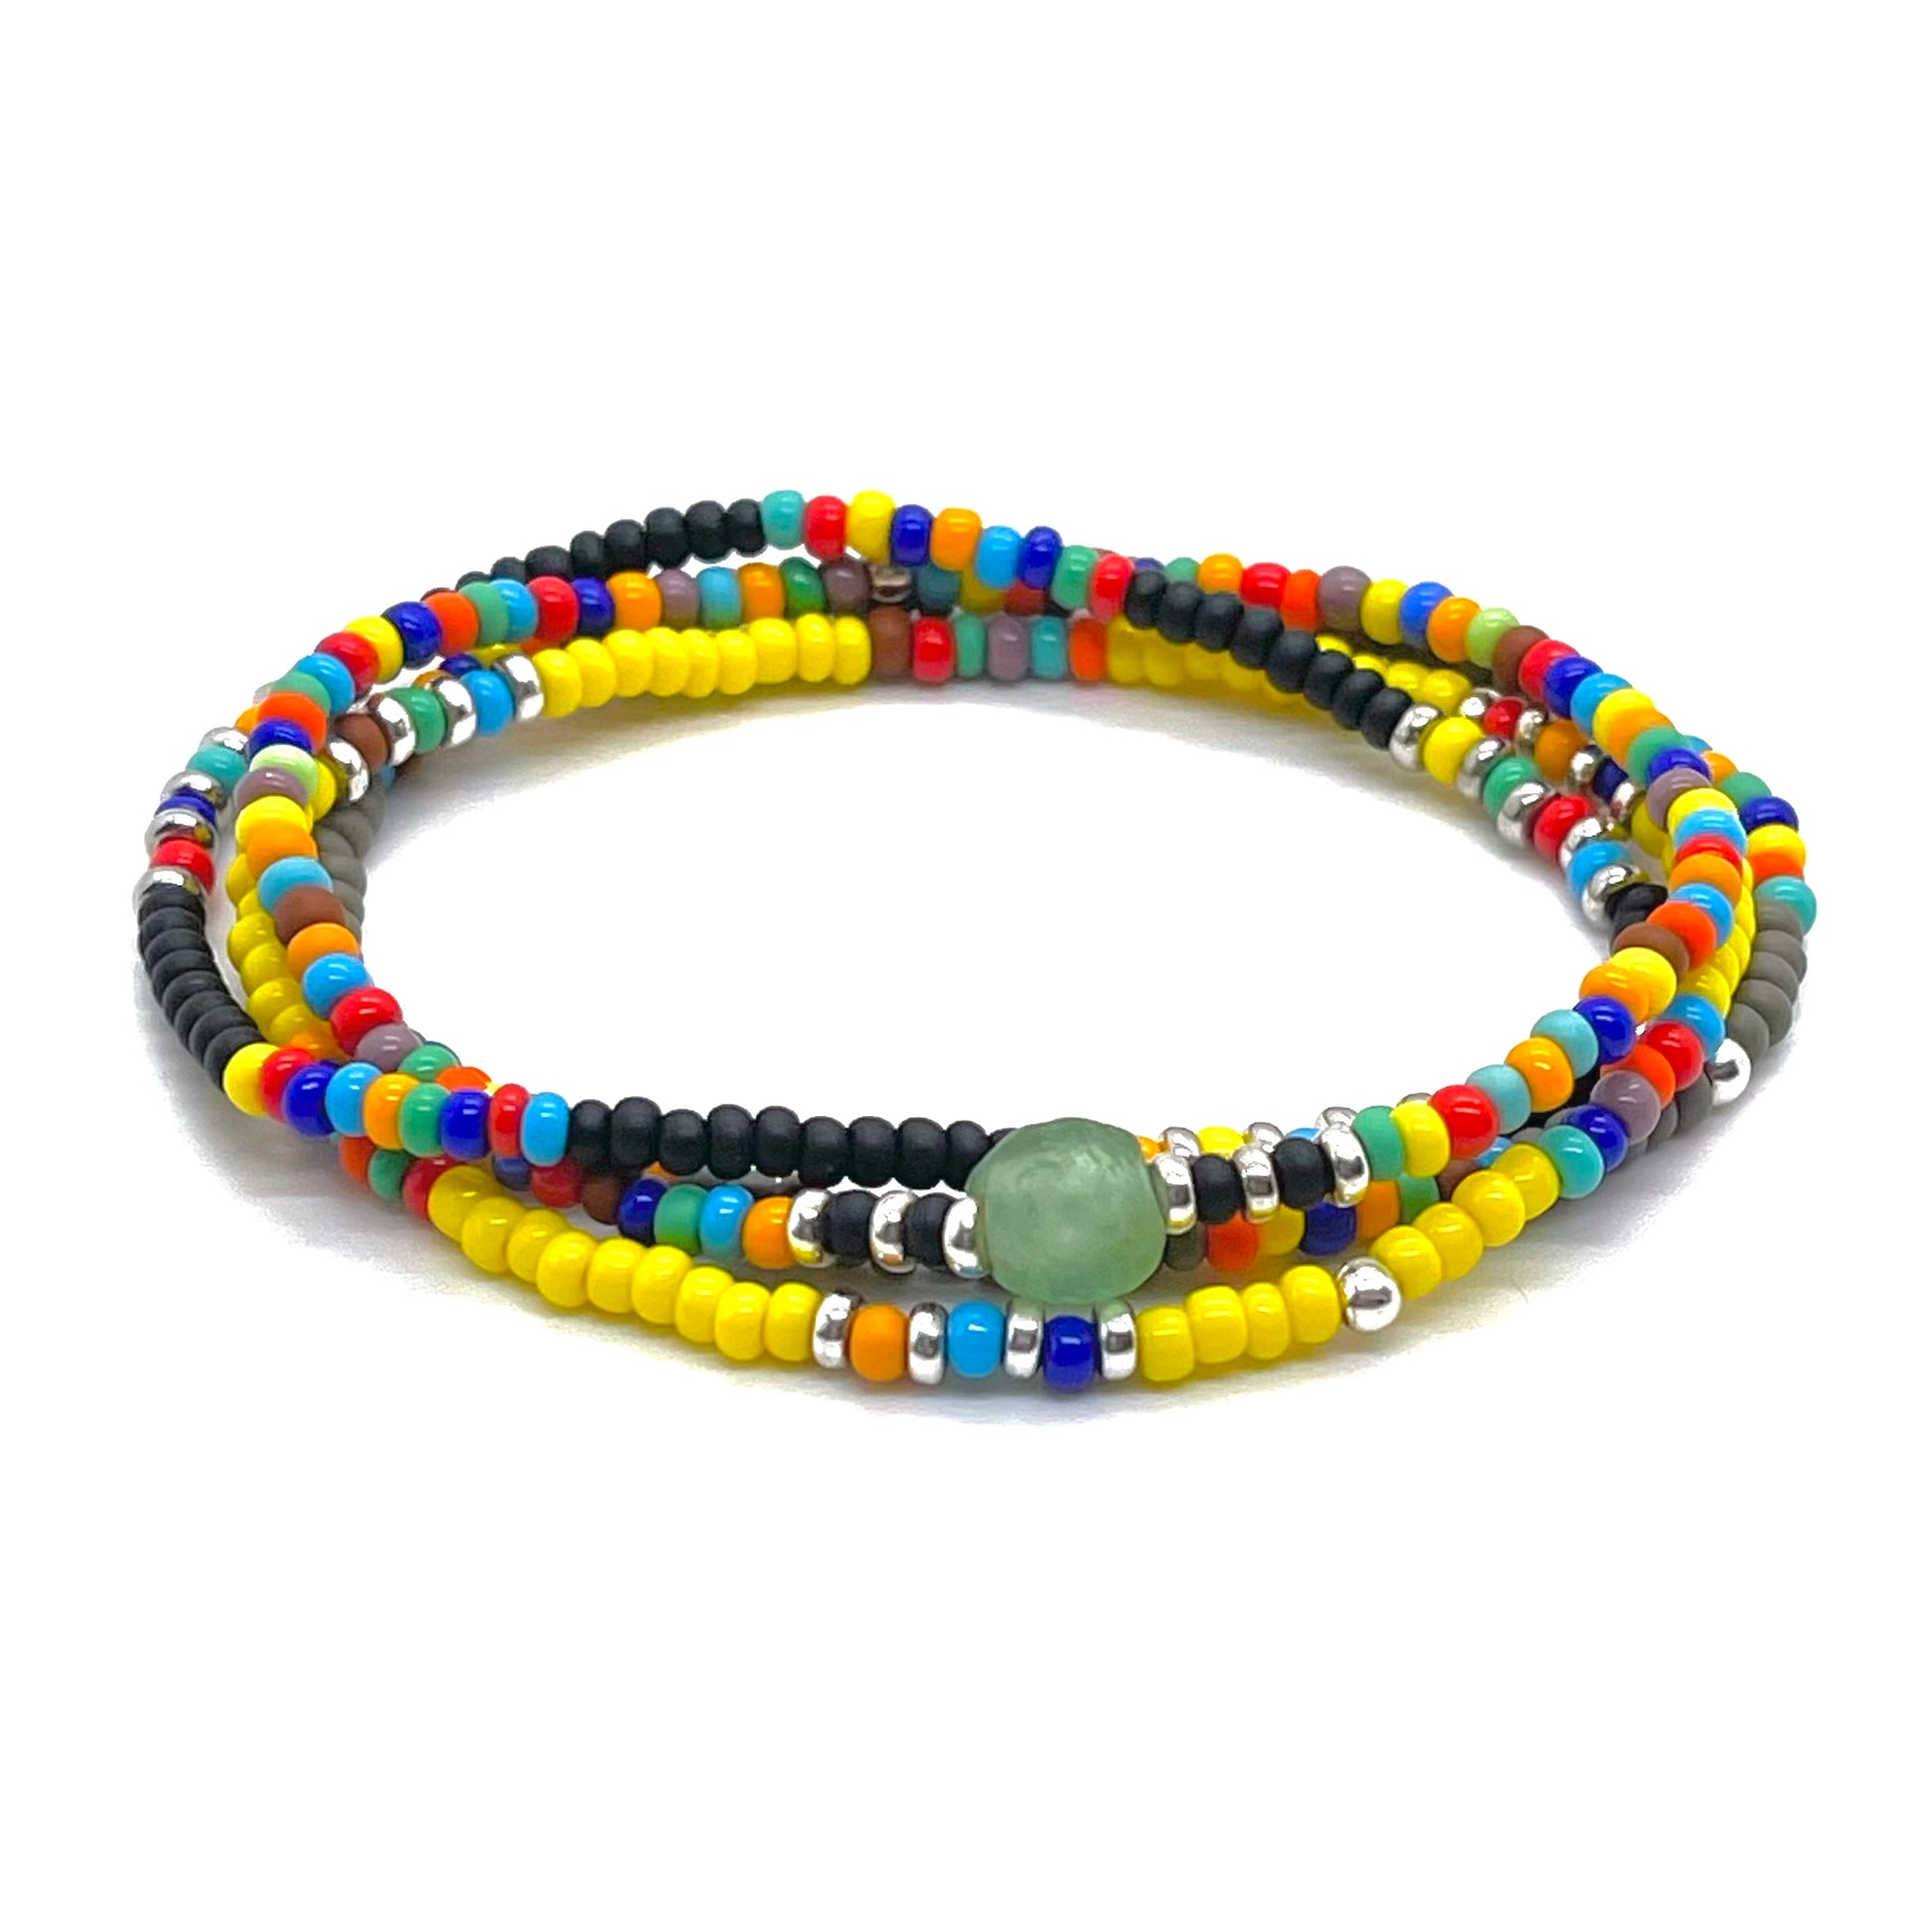 Men's stretch bracelets. Thin beaded bracelets in yellow, black, gray, and assorted bright rainbow colors.